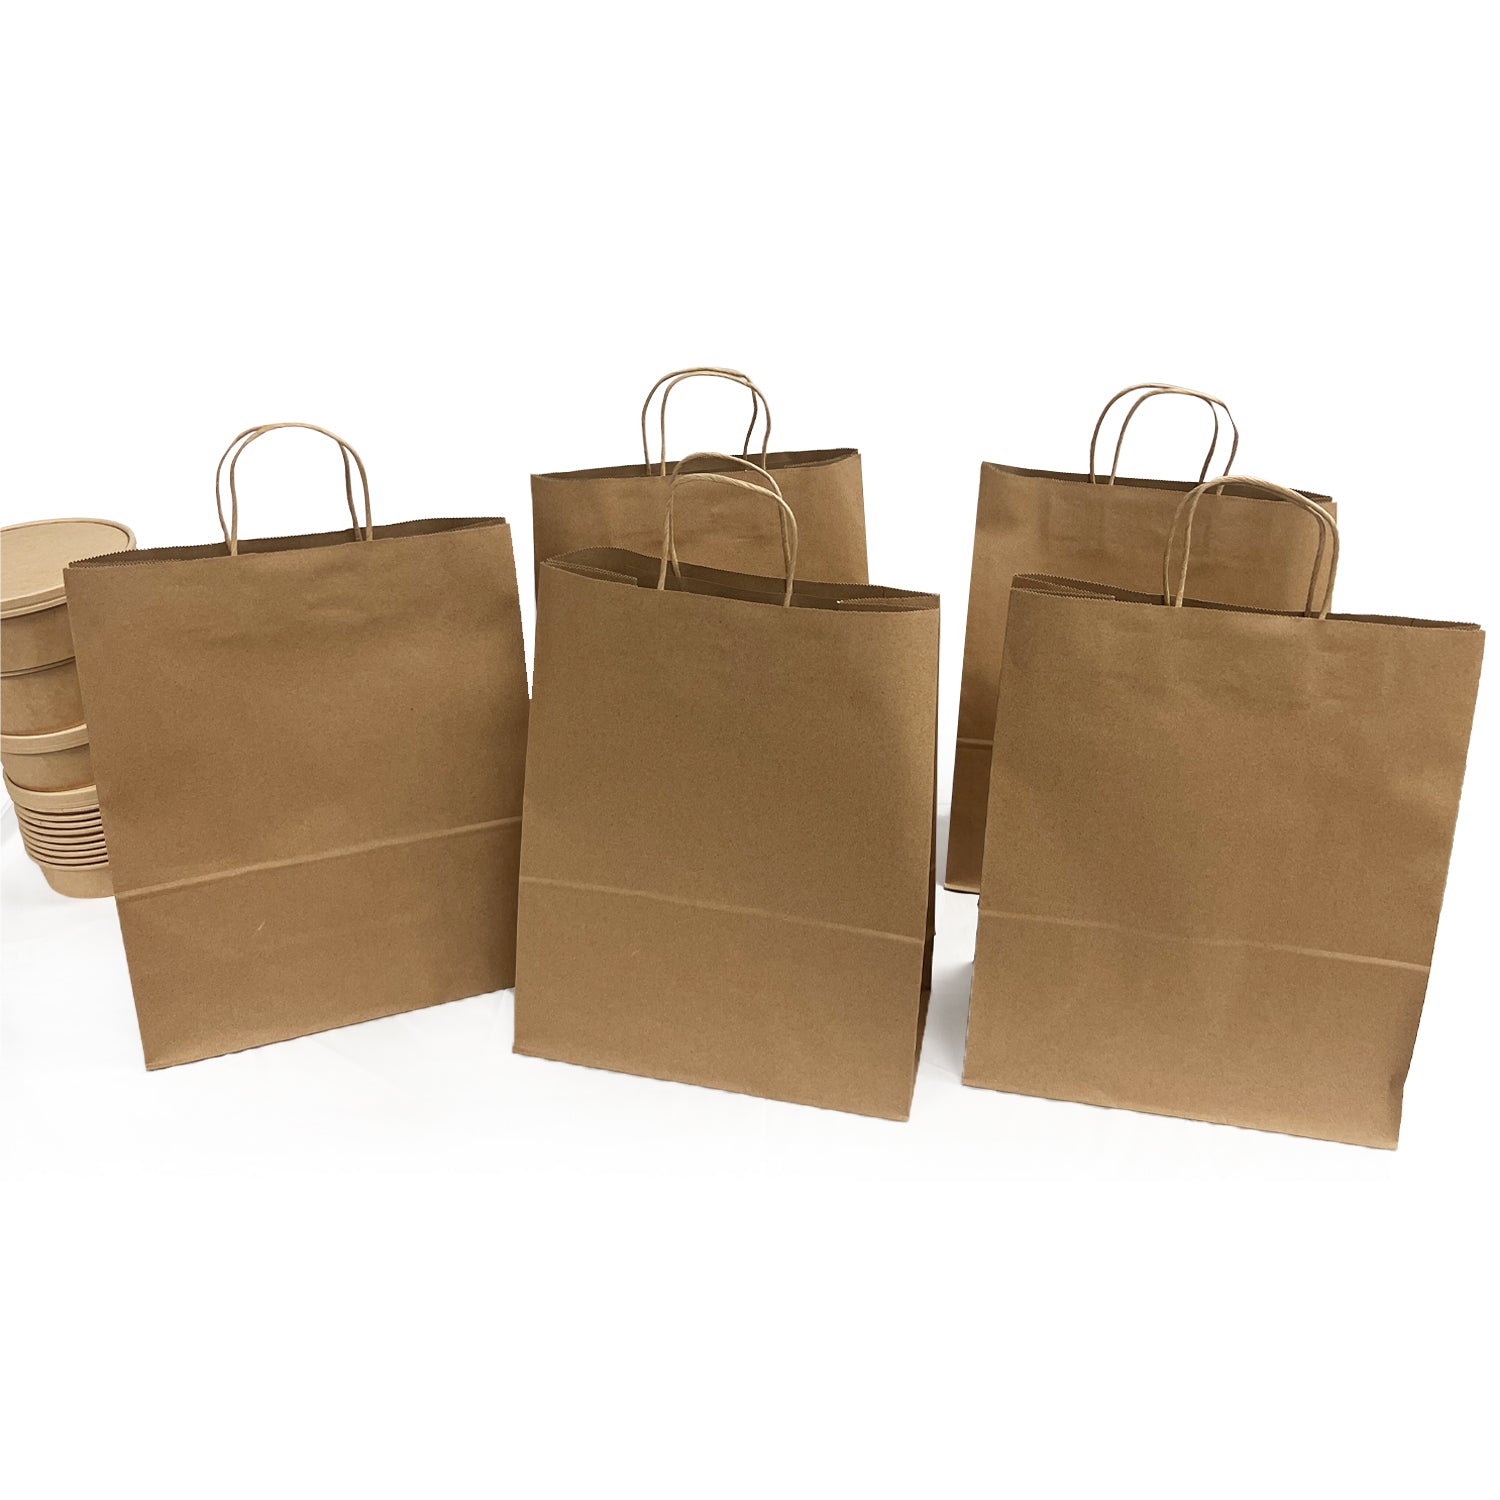 250 Pcs, Traveler, 13x6x16 inches, Kraft Paper Bags, with Twisted Handle